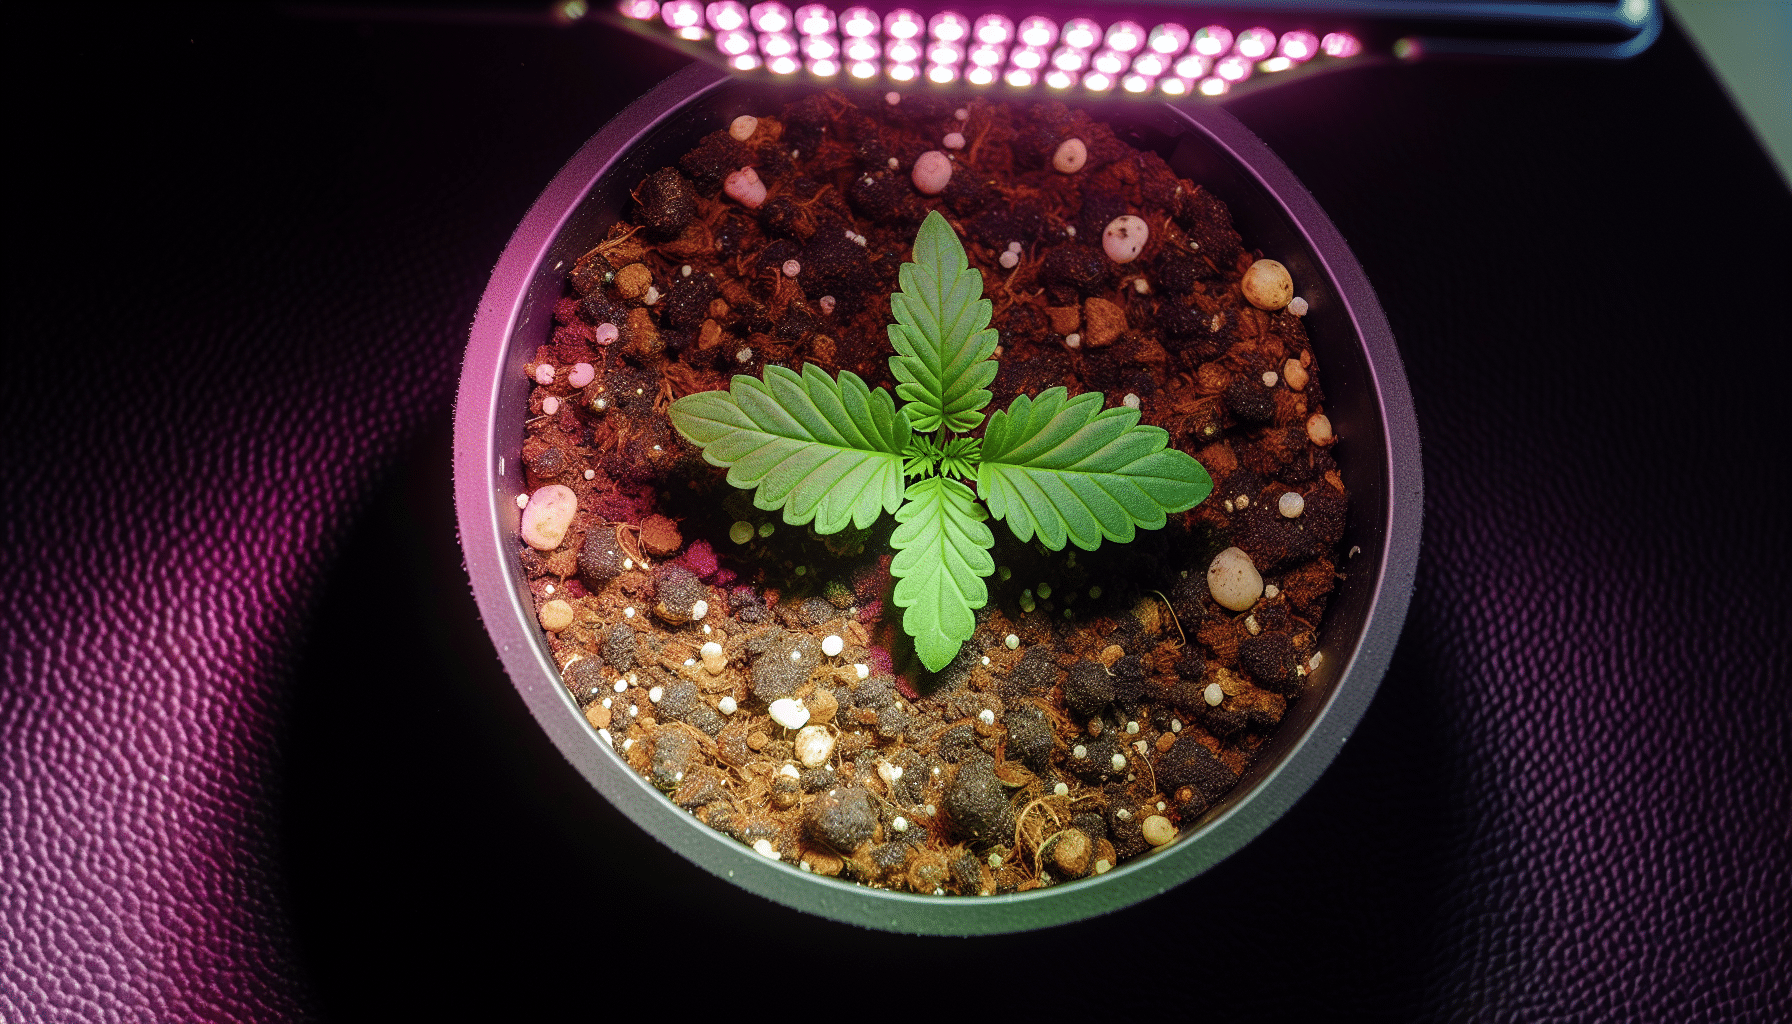 Young cannabis seedling under grow light, with clay pebbles